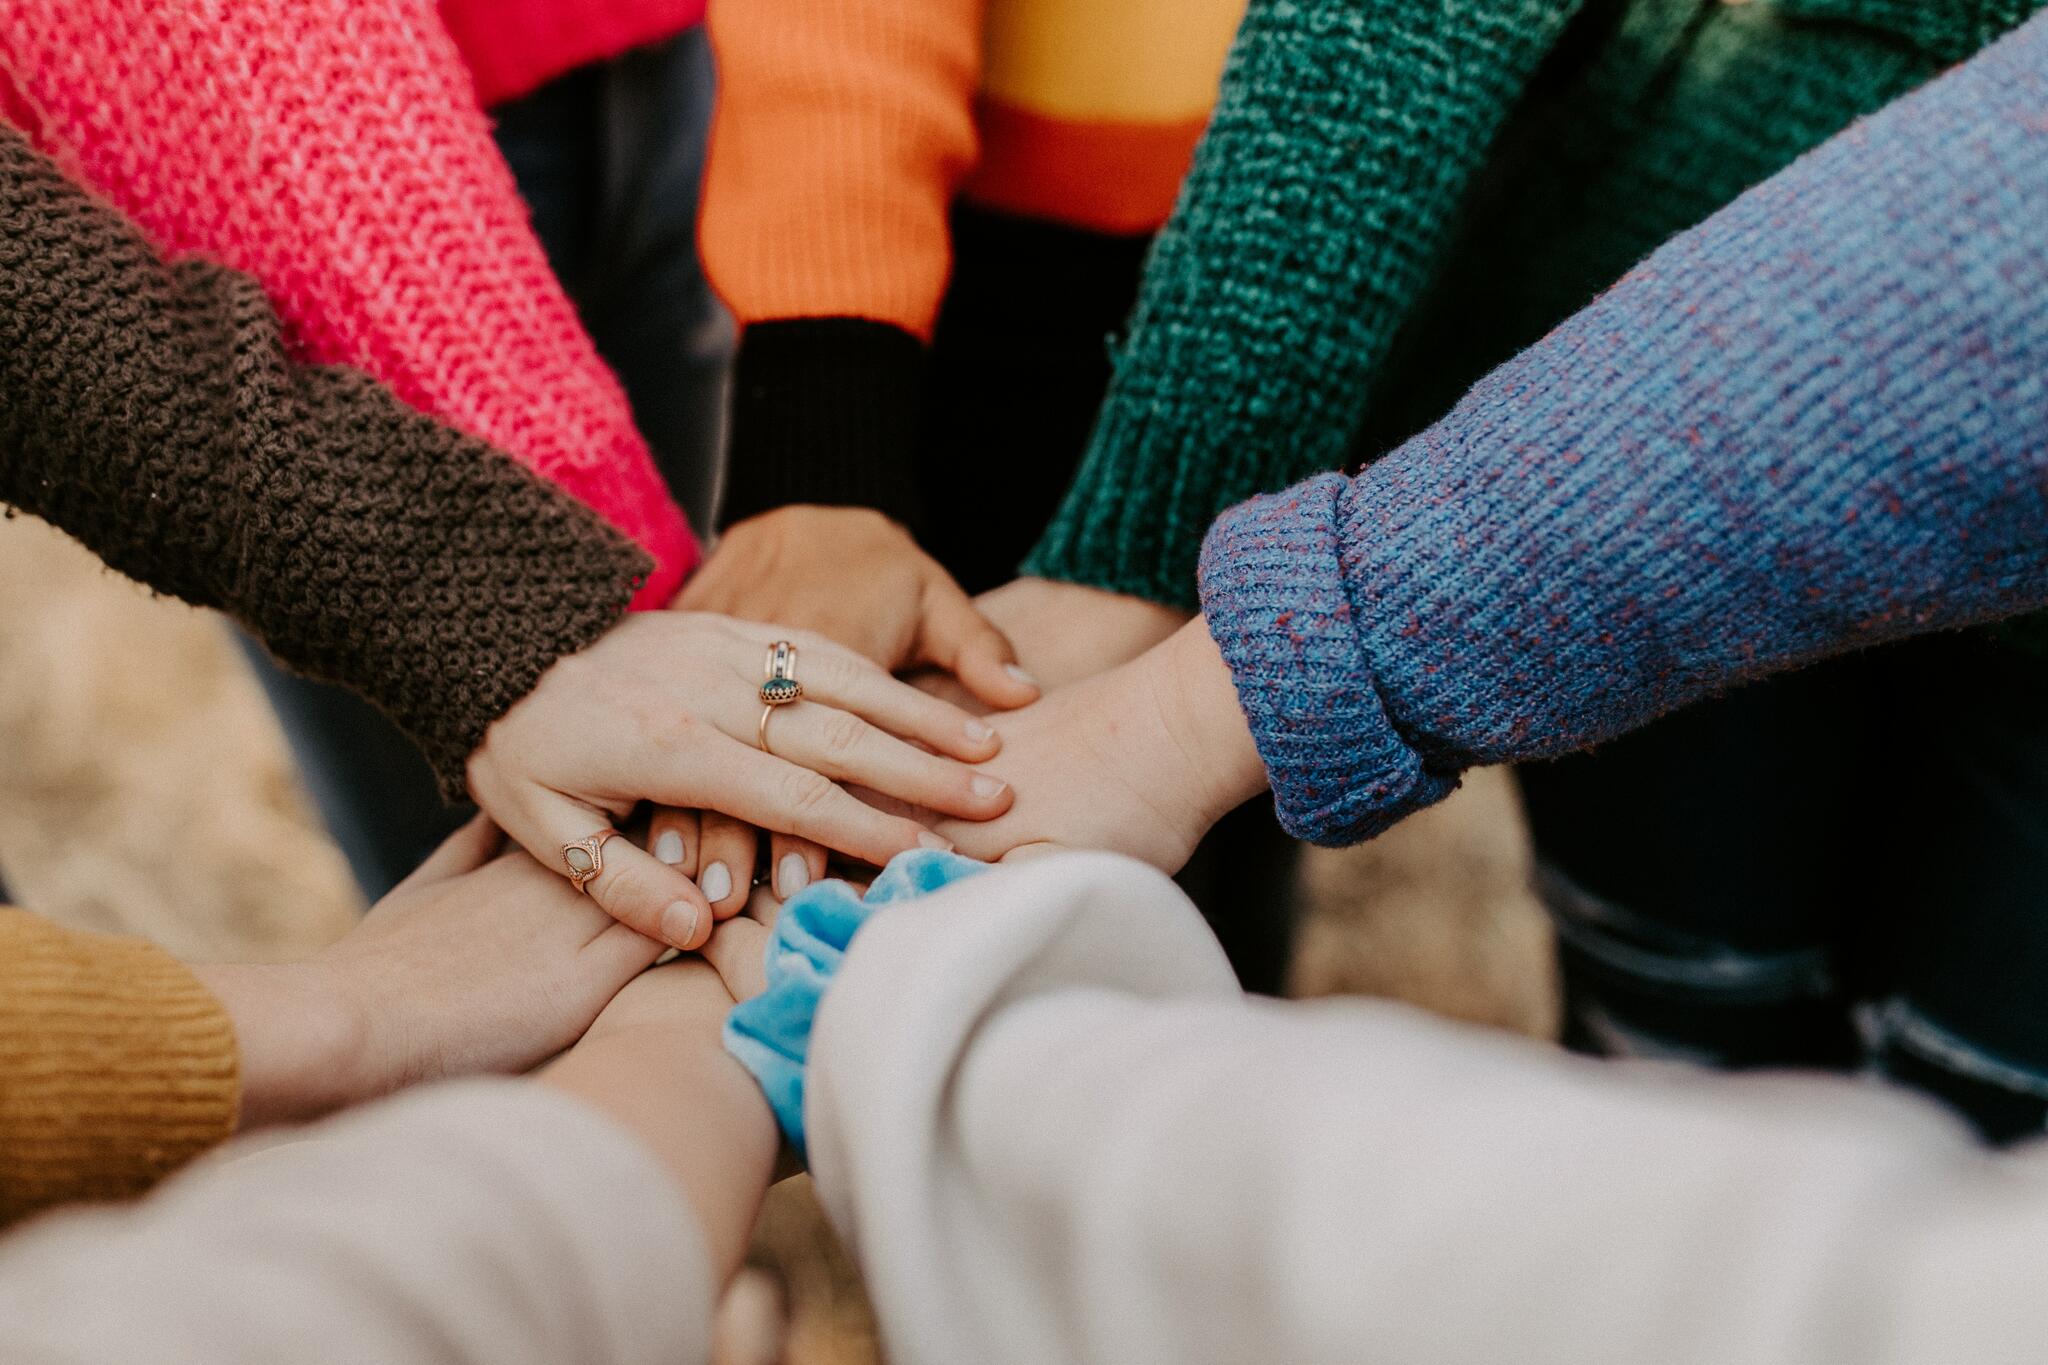 Many different people put their hands on top of each other's hands in a circle.